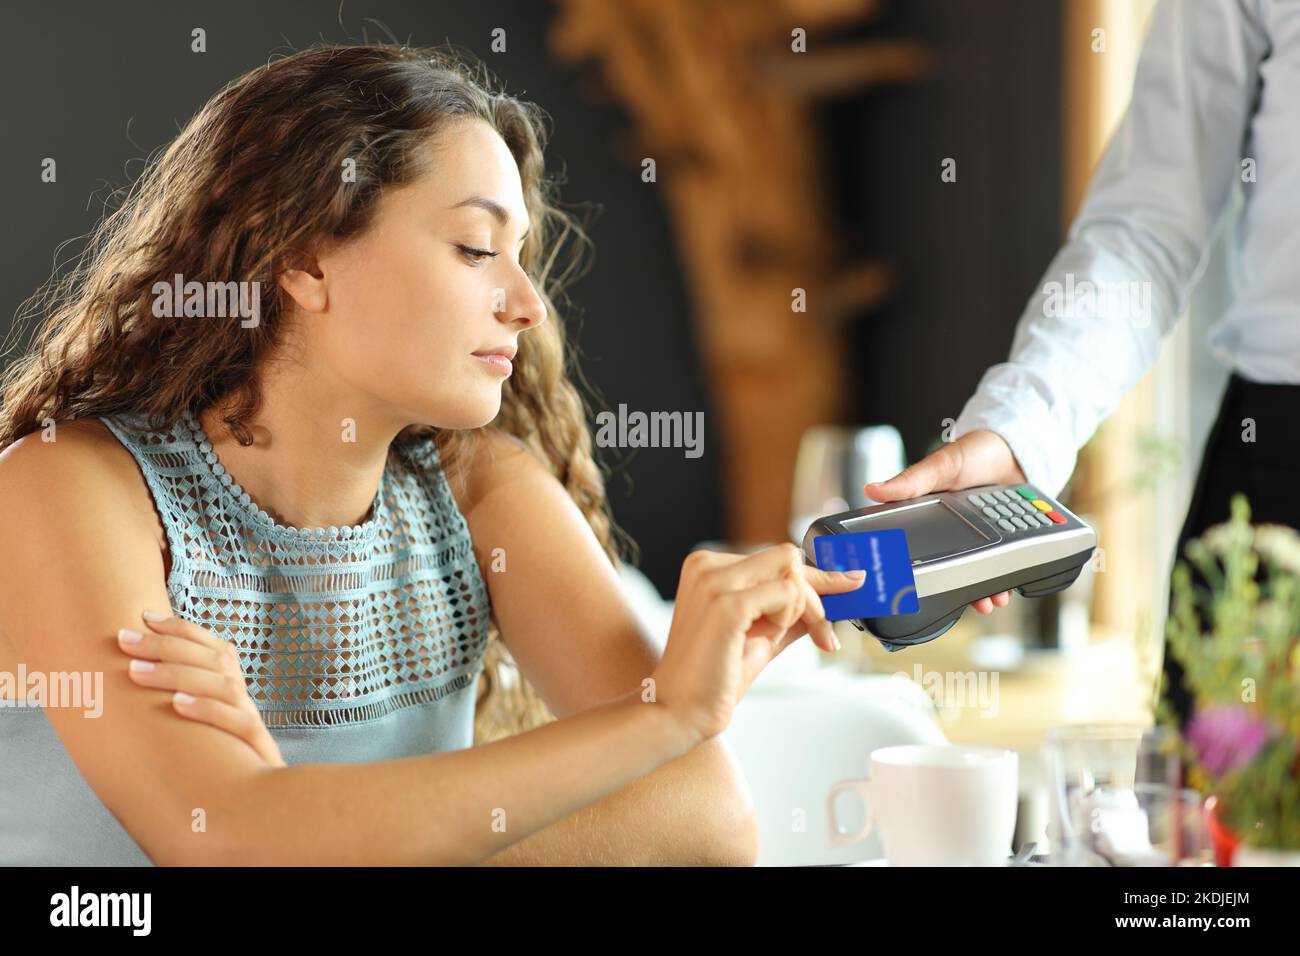 Customer is paying with a credit card and dataphone in a restaurant Stock Photo